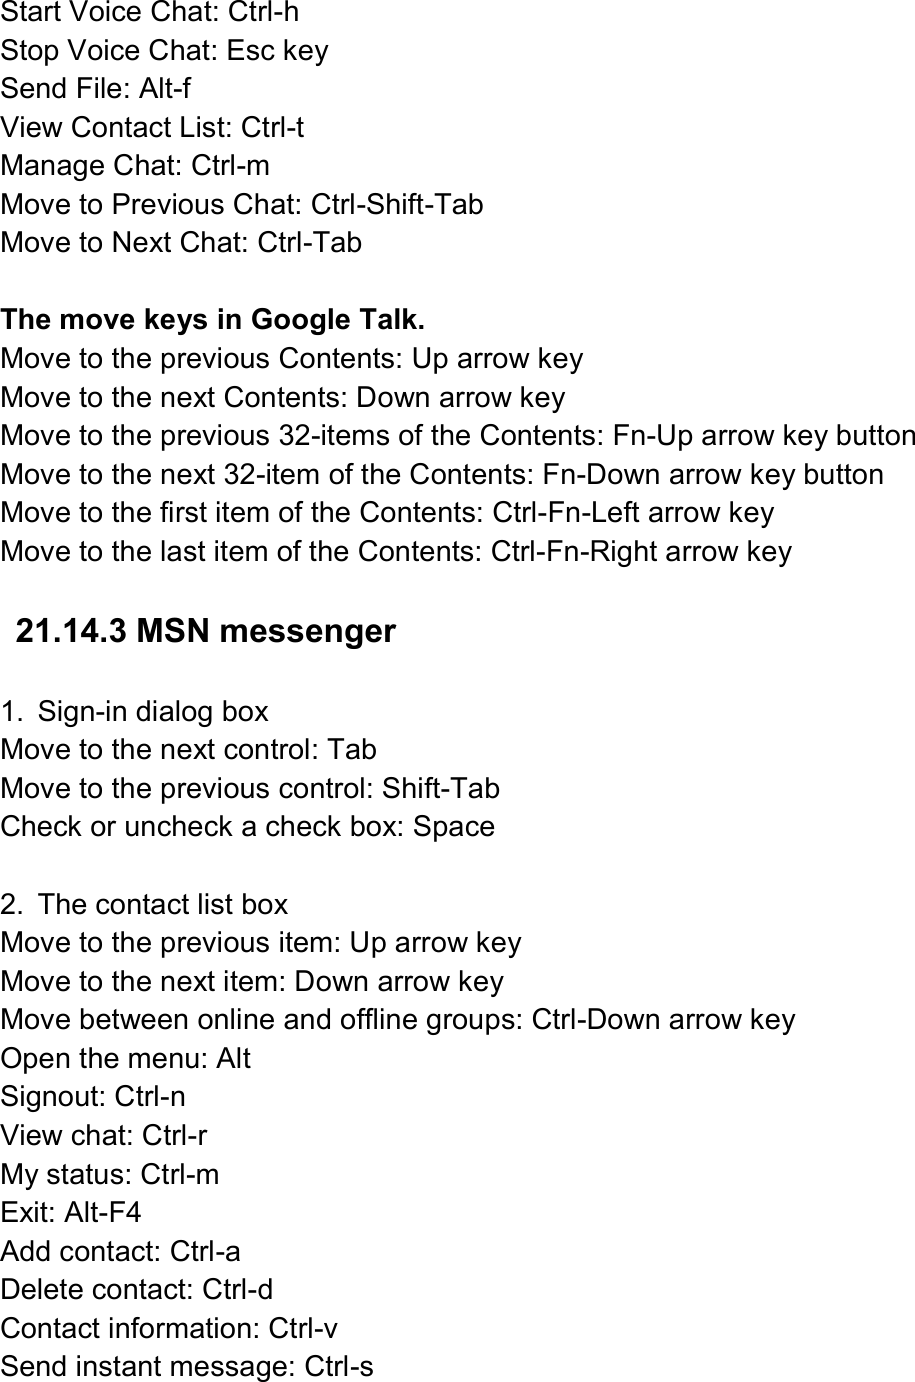  Start Voice Chat: Ctrl-h   Stop Voice Chat: Esc key Send File: Alt-f   View Contact List: Ctrl-t   Manage Chat: Ctrl-m Move to Previous Chat: Ctrl-Shift-Tab Move to Next Chat: Ctrl-Tab  The move keys in Google Talk. Move to the previous Contents: Up arrow key   Move to the next Contents: Down arrow key Move to the previous 32-items of the Contents: Fn-Up arrow key button Move to the next 32-item of the Contents: Fn-Down arrow key button Move to the first item of the Contents: Ctrl-Fn-Left arrow key Move to the last item of the Contents: Ctrl-Fn-Right arrow key  21.14.3 MSN messenger  1.  Sign-in dialog box Move to the next control: Tab Move to the previous control: Shift-Tab Check or uncheck a check box: Space  2.  The contact list box Move to the previous item: Up arrow key Move to the next item: Down arrow key Move between online and offline groups: Ctrl-Down arrow key Open the menu: Alt Signout: Ctrl-n View chat: Ctrl-r My status: Ctrl-m Exit: Alt-F4 Add contact: Ctrl-a Delete contact: Ctrl-d Contact information: Ctrl-v Send instant message: Ctrl-s 